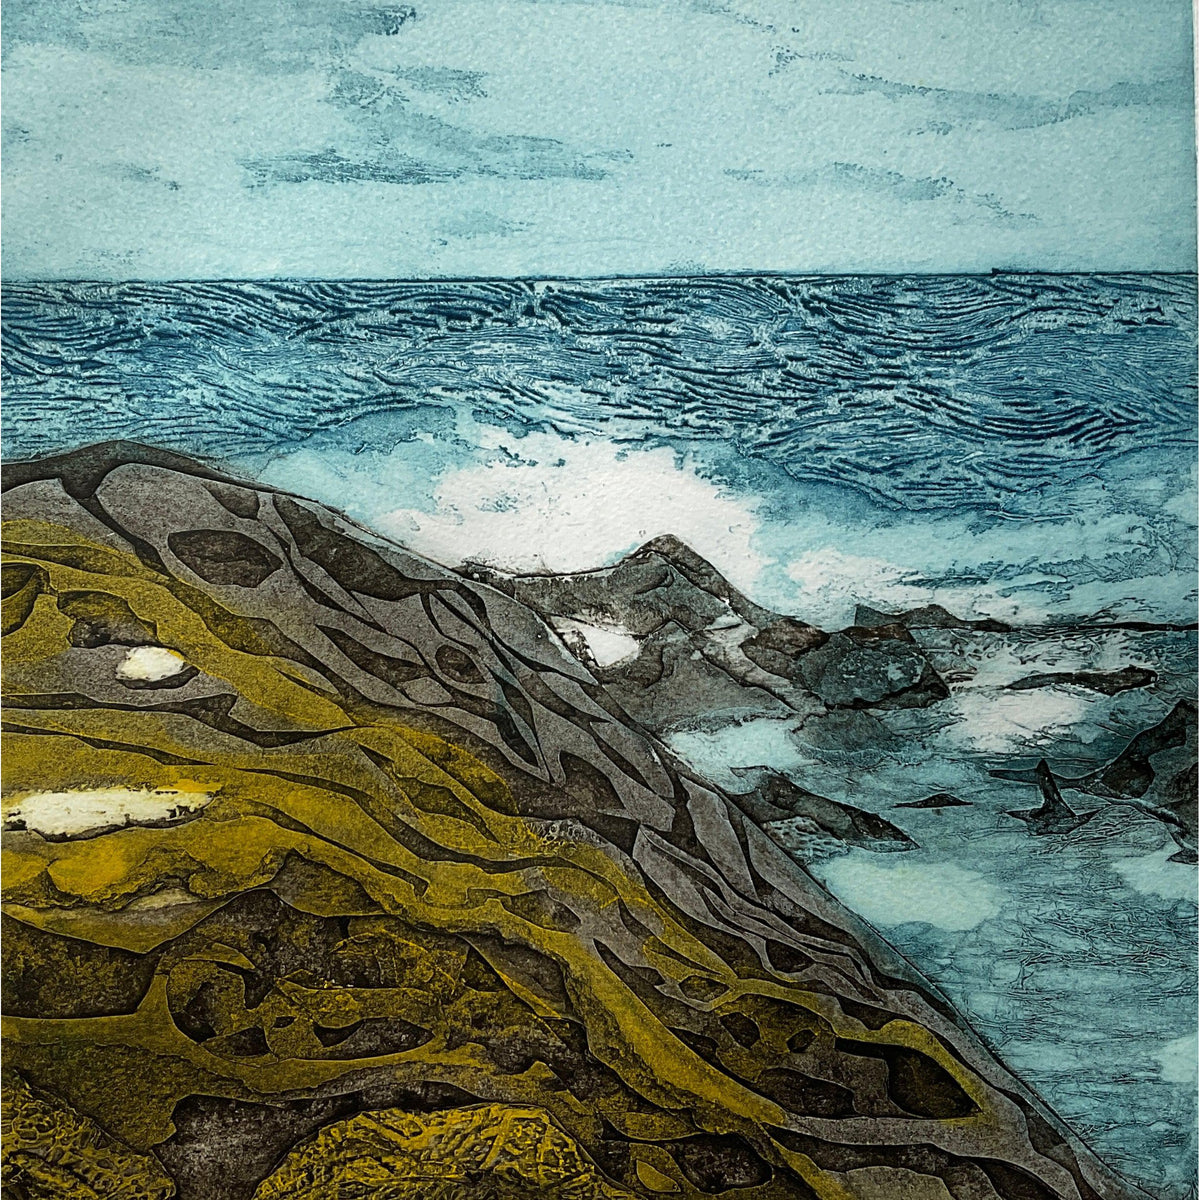 Making A Splash, limited edition collagraph  by Sarah Ross-Thompson available at Padstow Gallery, Cornwall